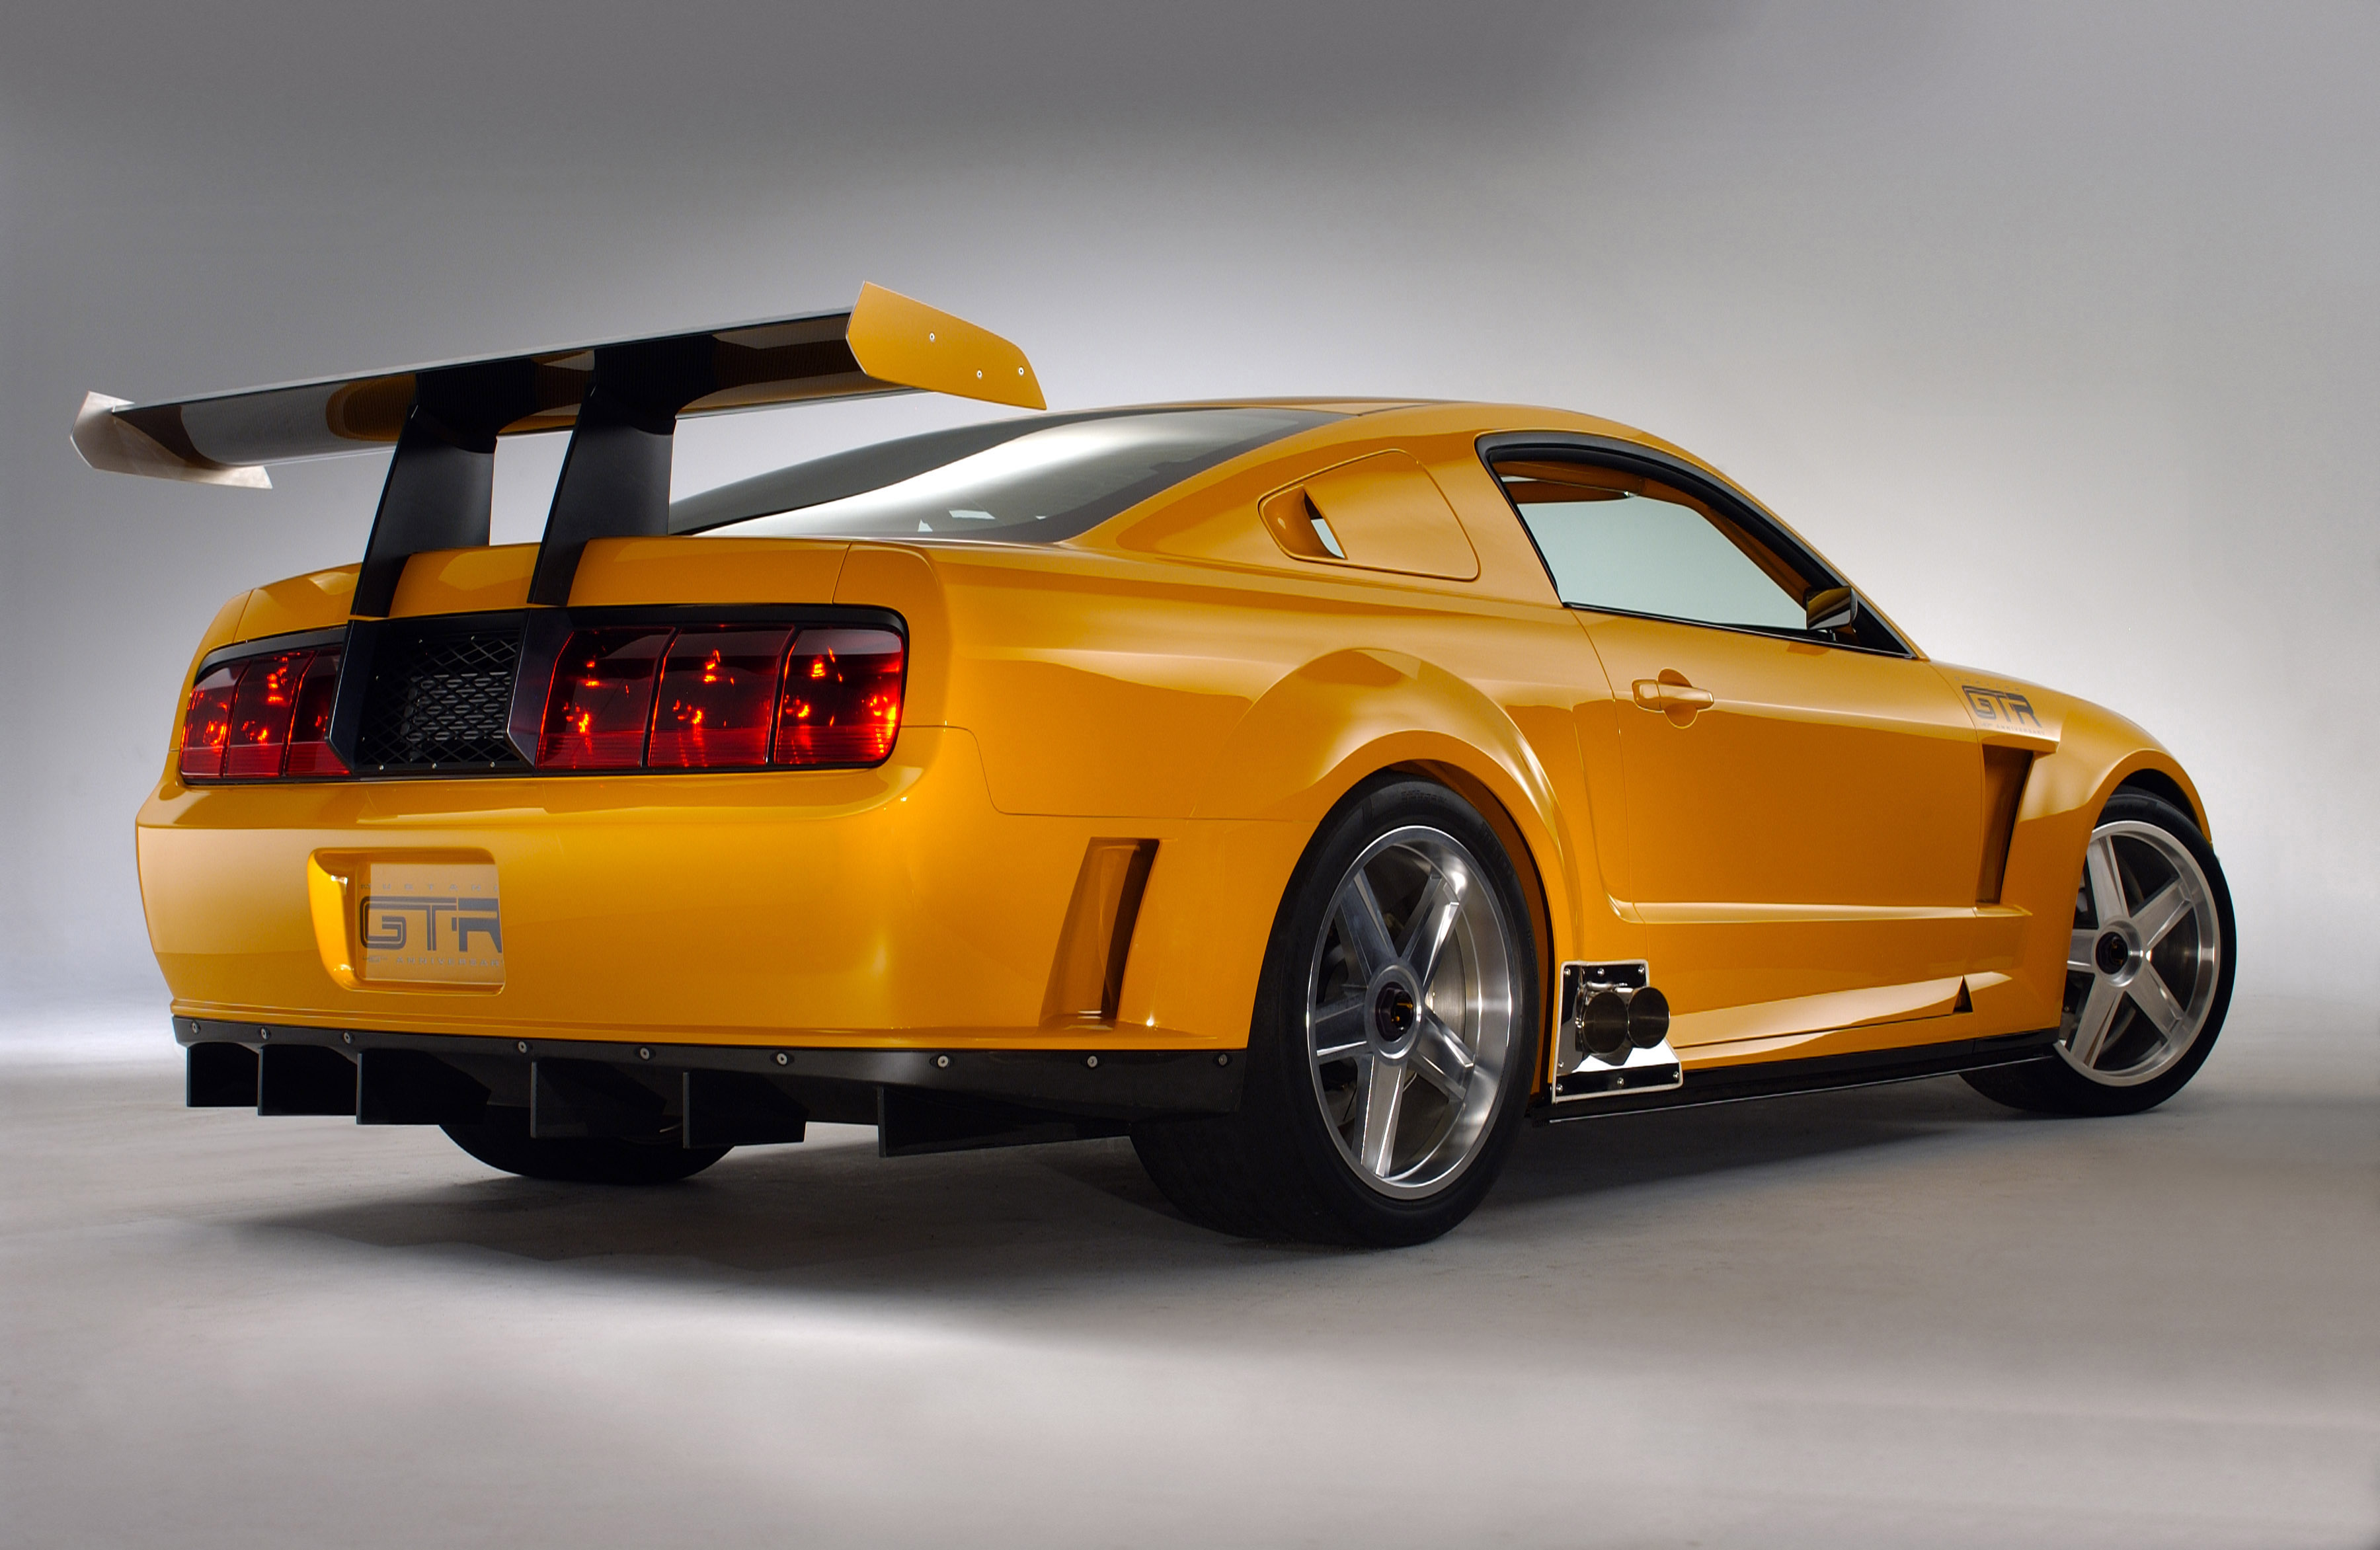 Ford Mustang Gt-r #11